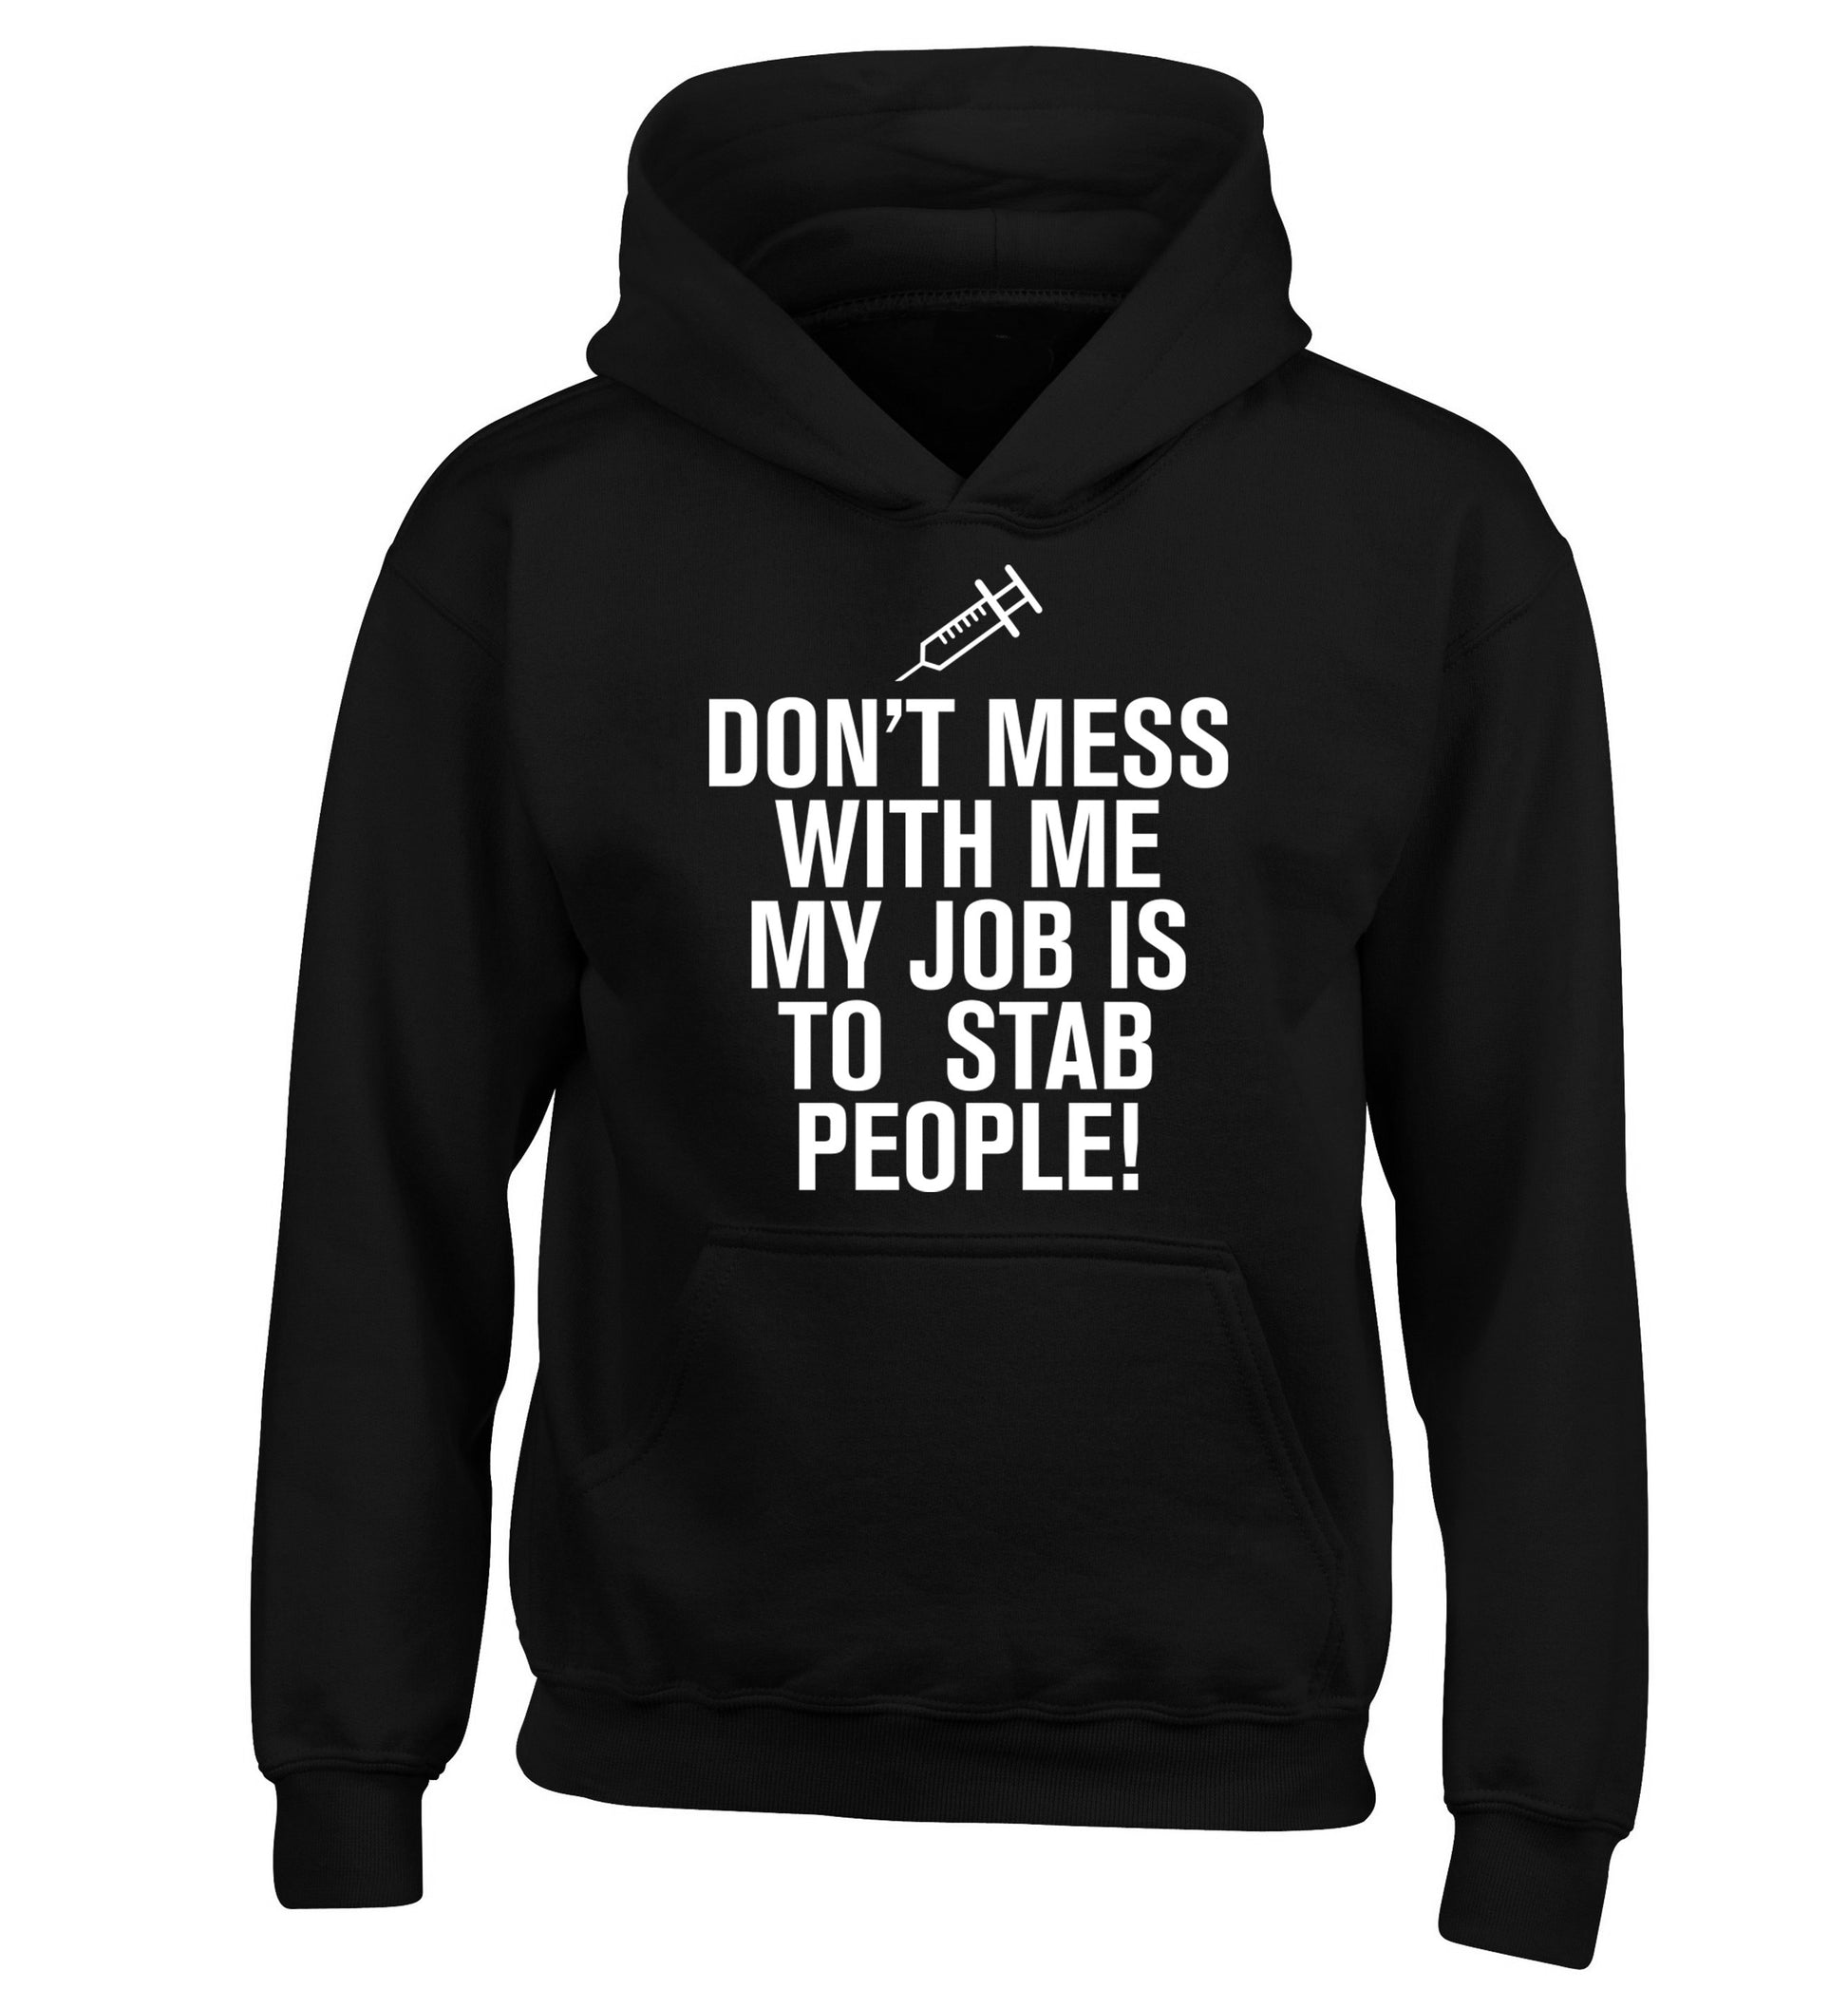 Don't mess with me my job is to stab people! children's black hoodie 12-14 Years